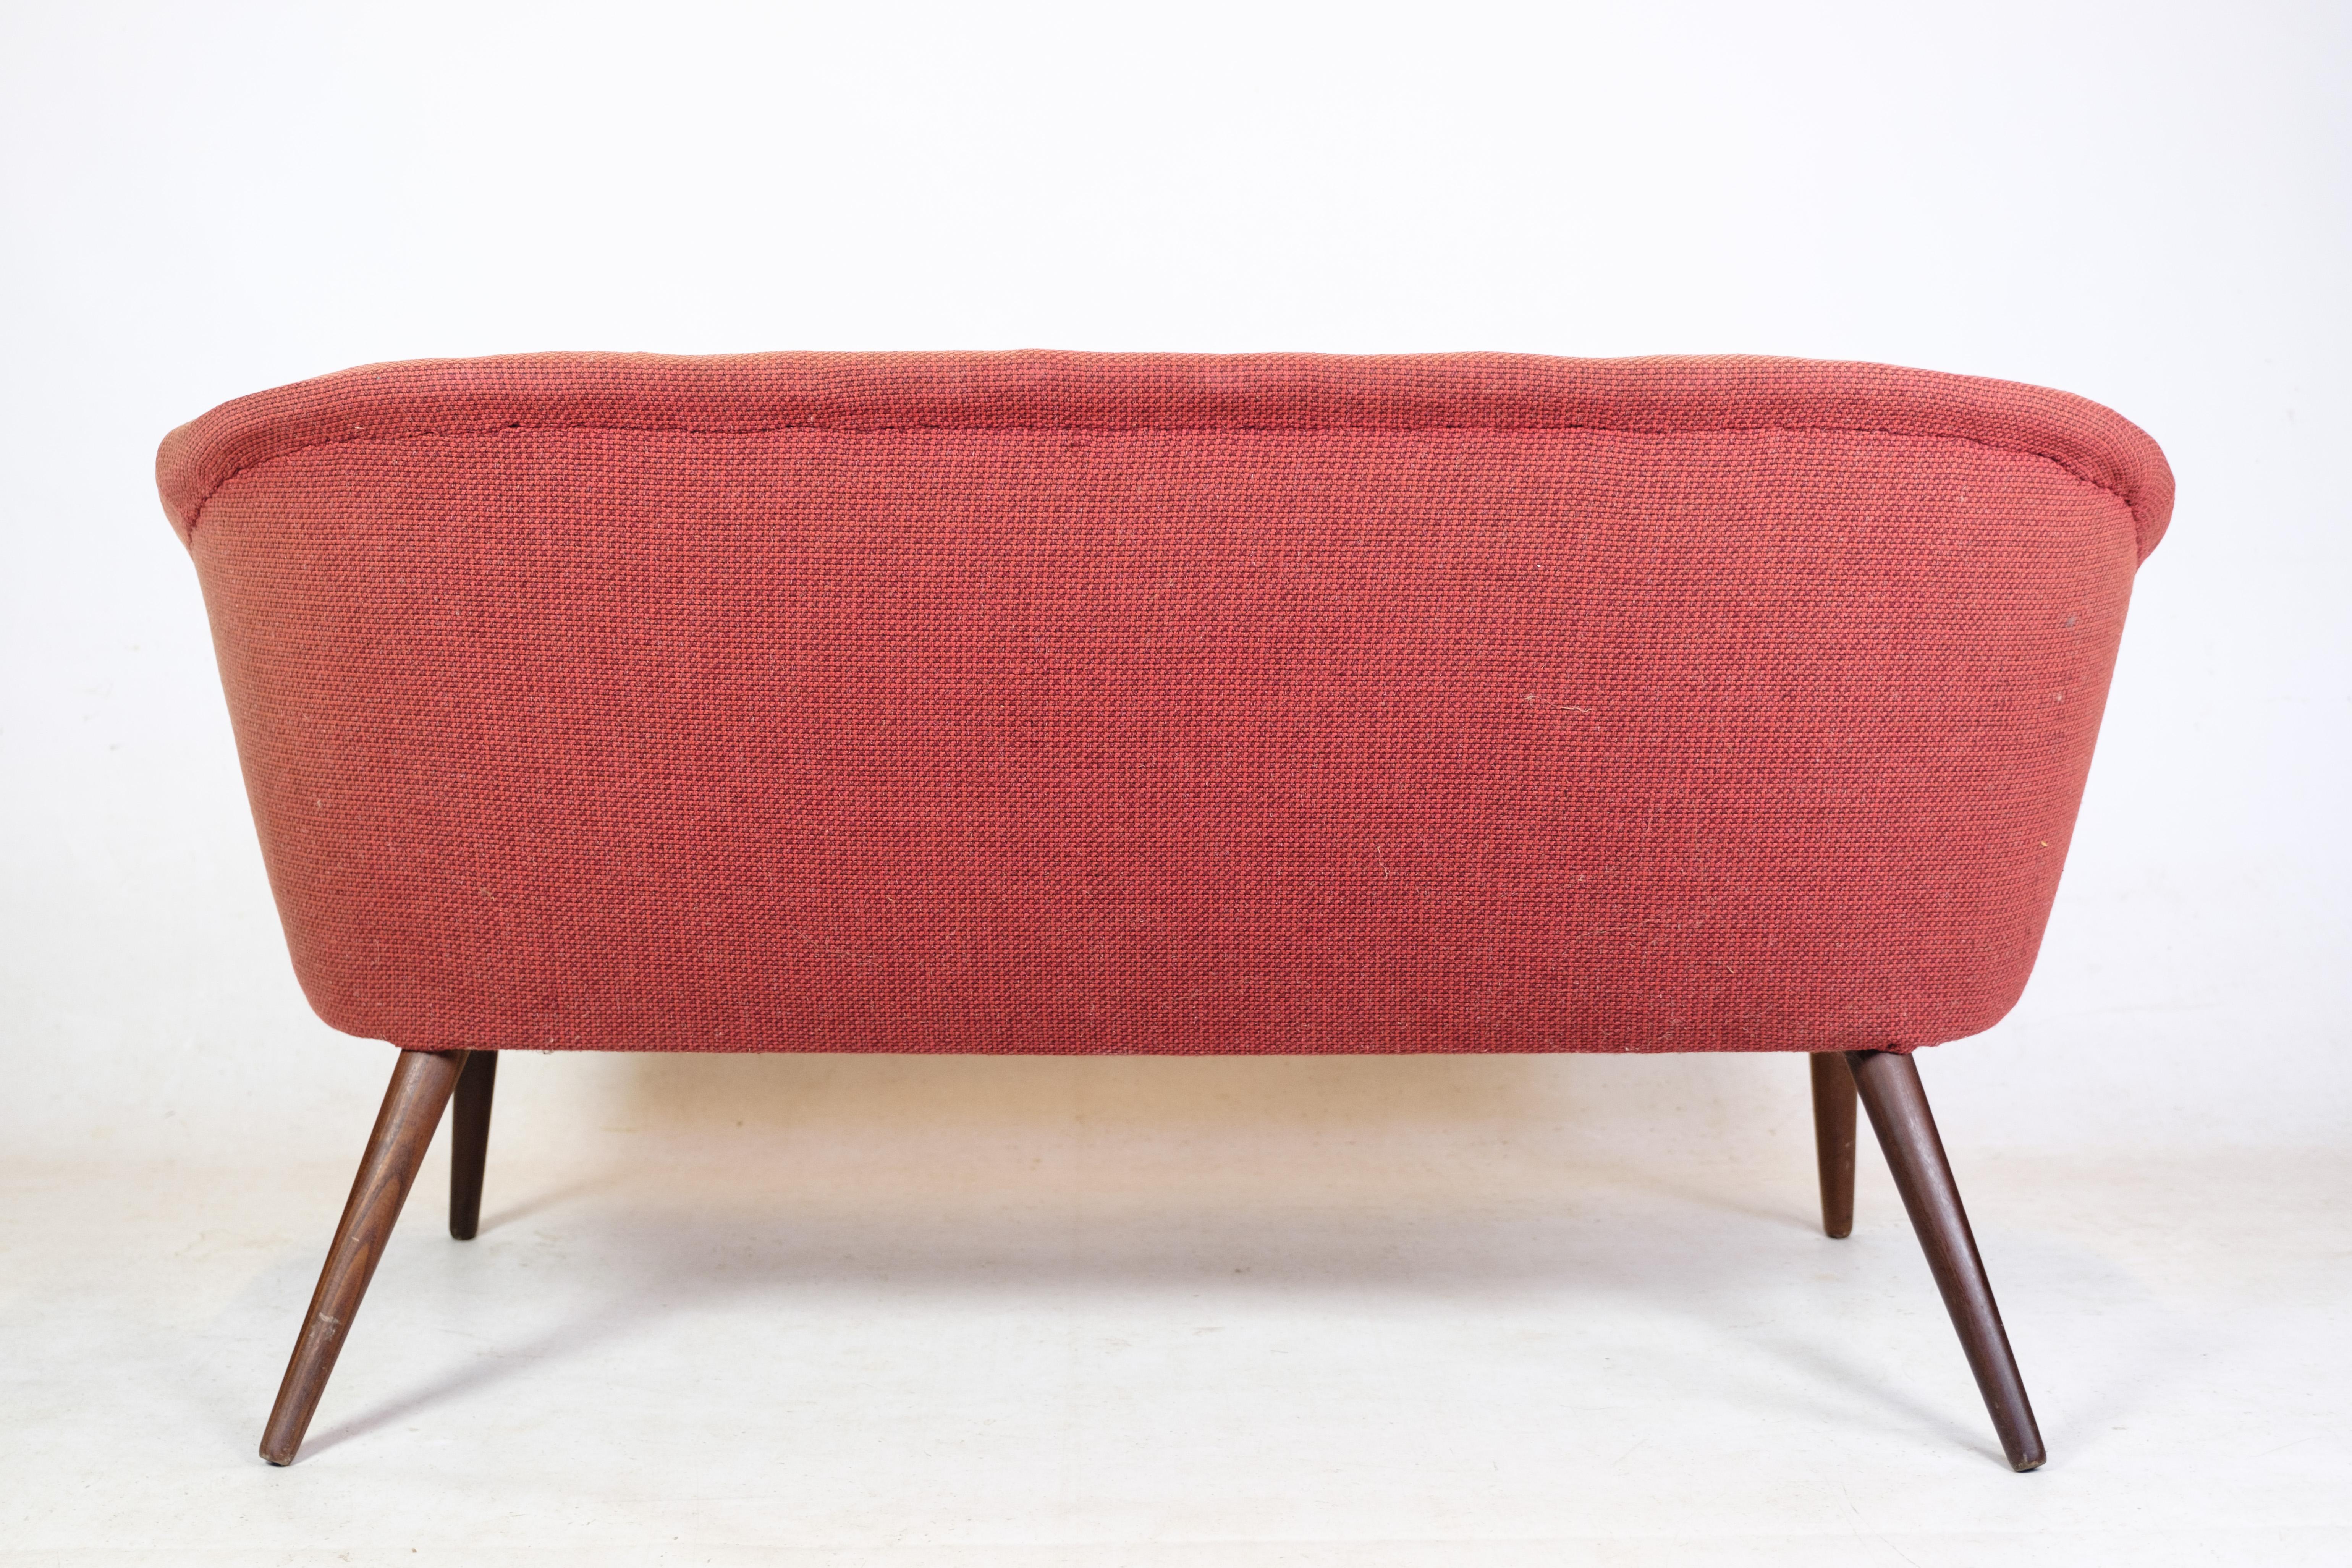 Fabric Two person Sofa Designed by Bent Møller Jepsen with teak legs and nails, 1950